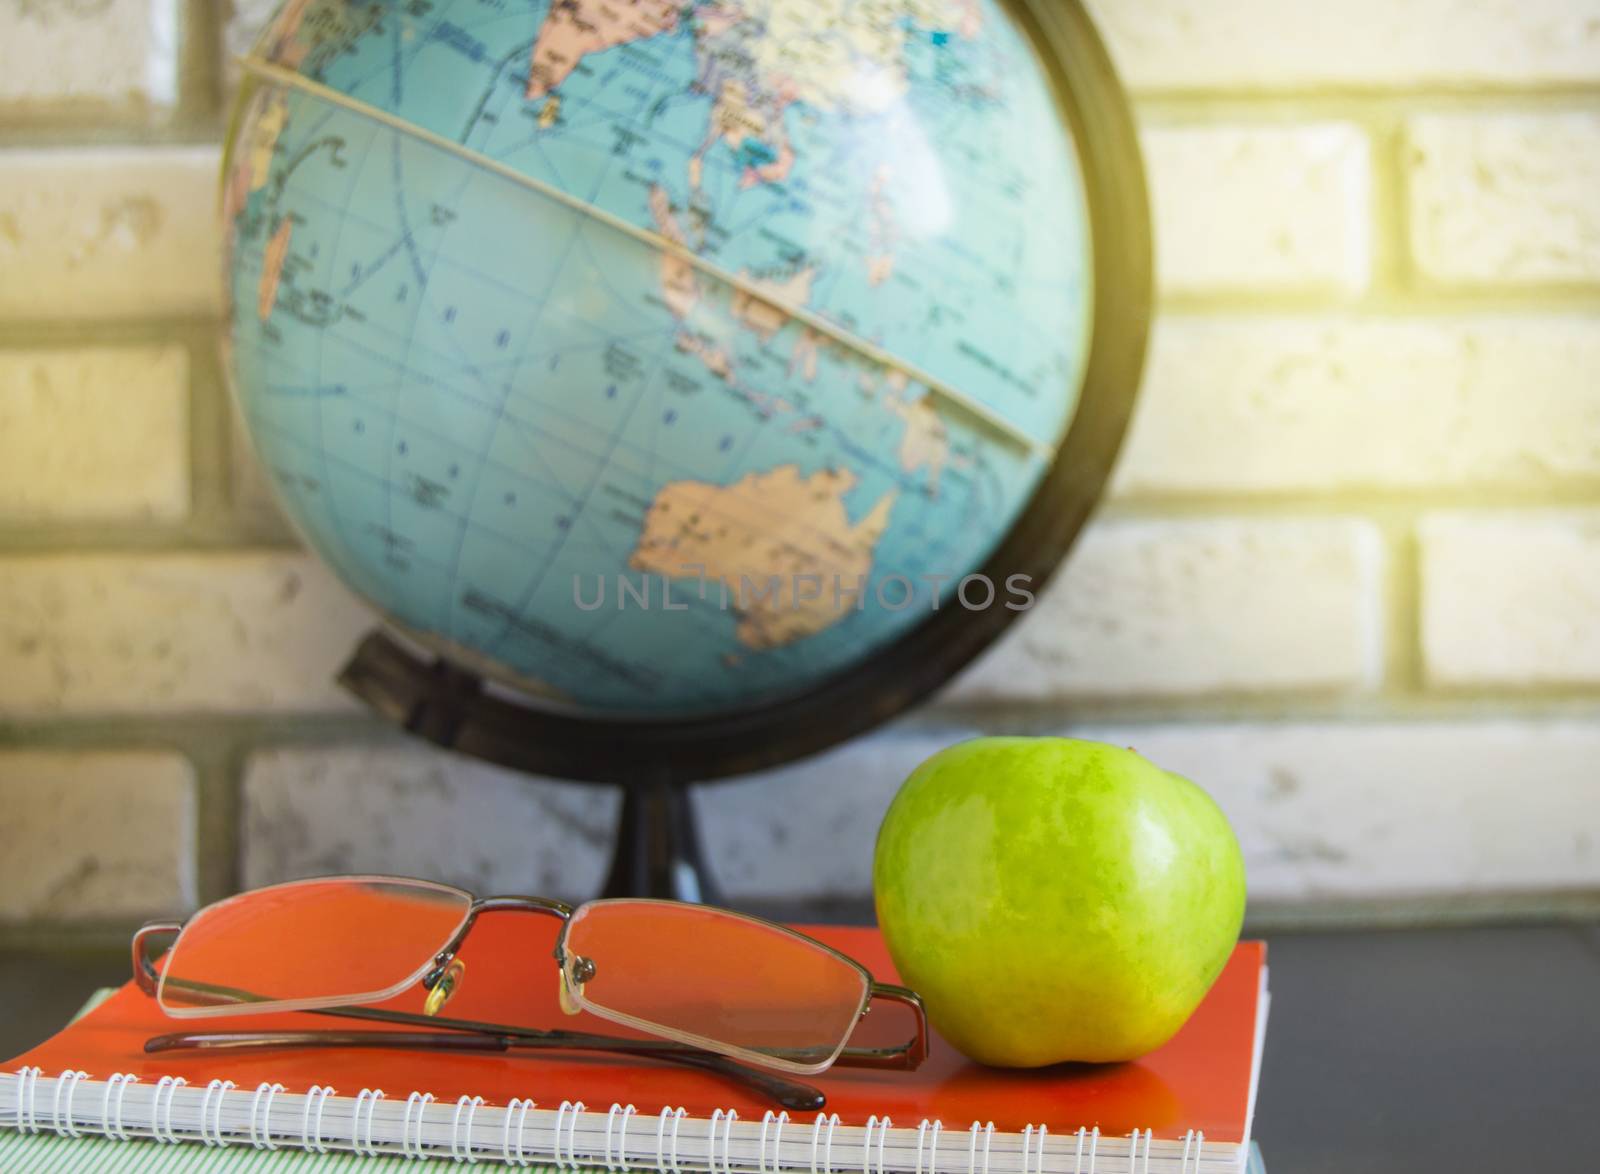 World teacher's Day at school. Still life with books, globe, Apple, glasses, sunlight by claire_lucia